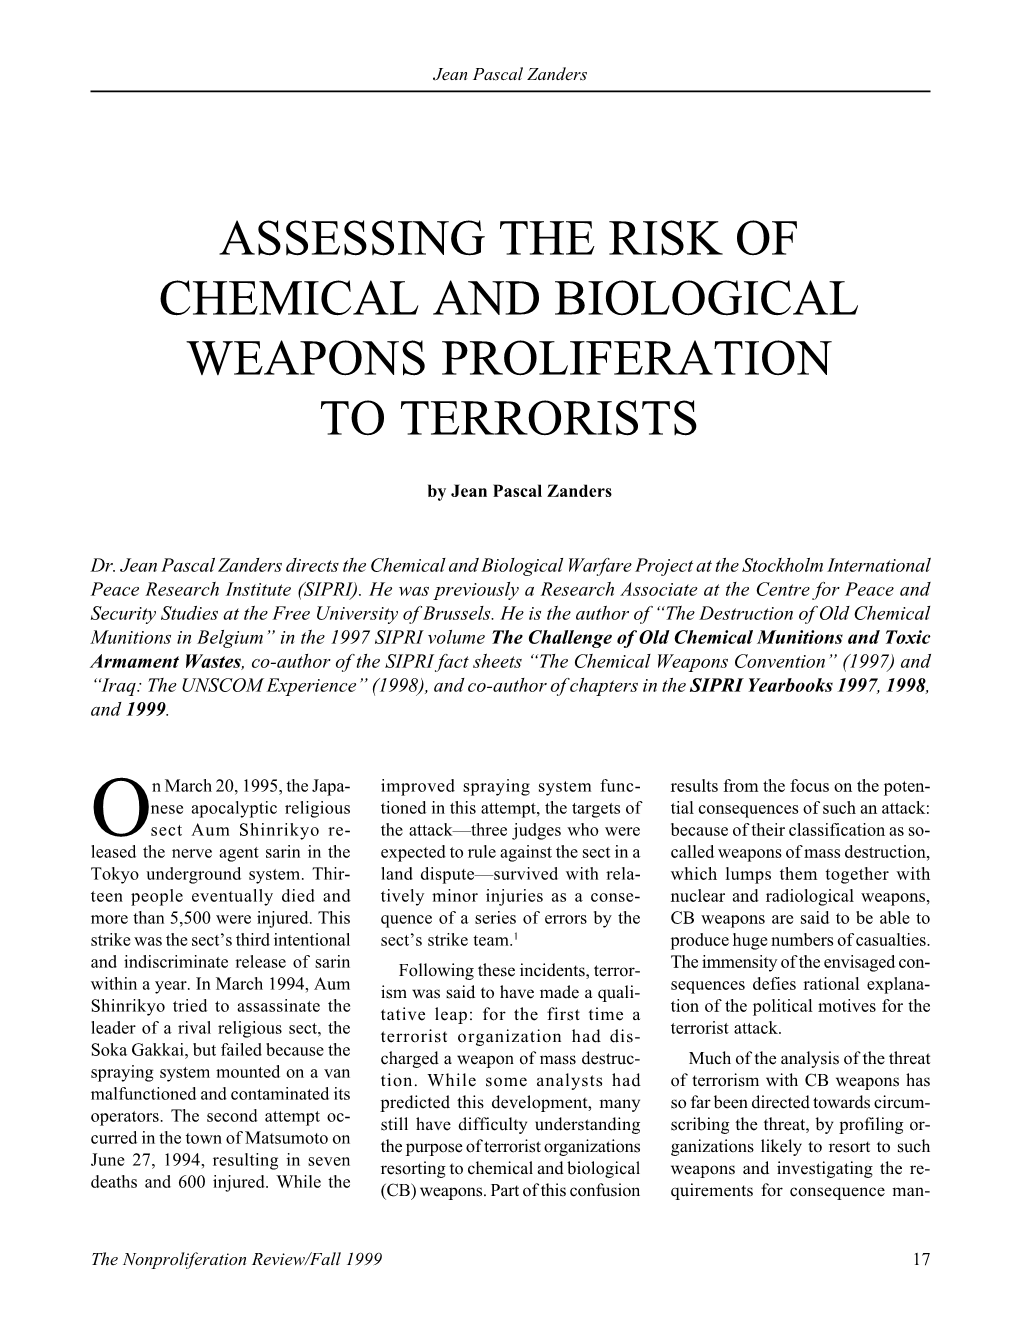 Npr 6.4: Assessing the Risk of Chemical and Biological Weapons Proliferation to Terrorists